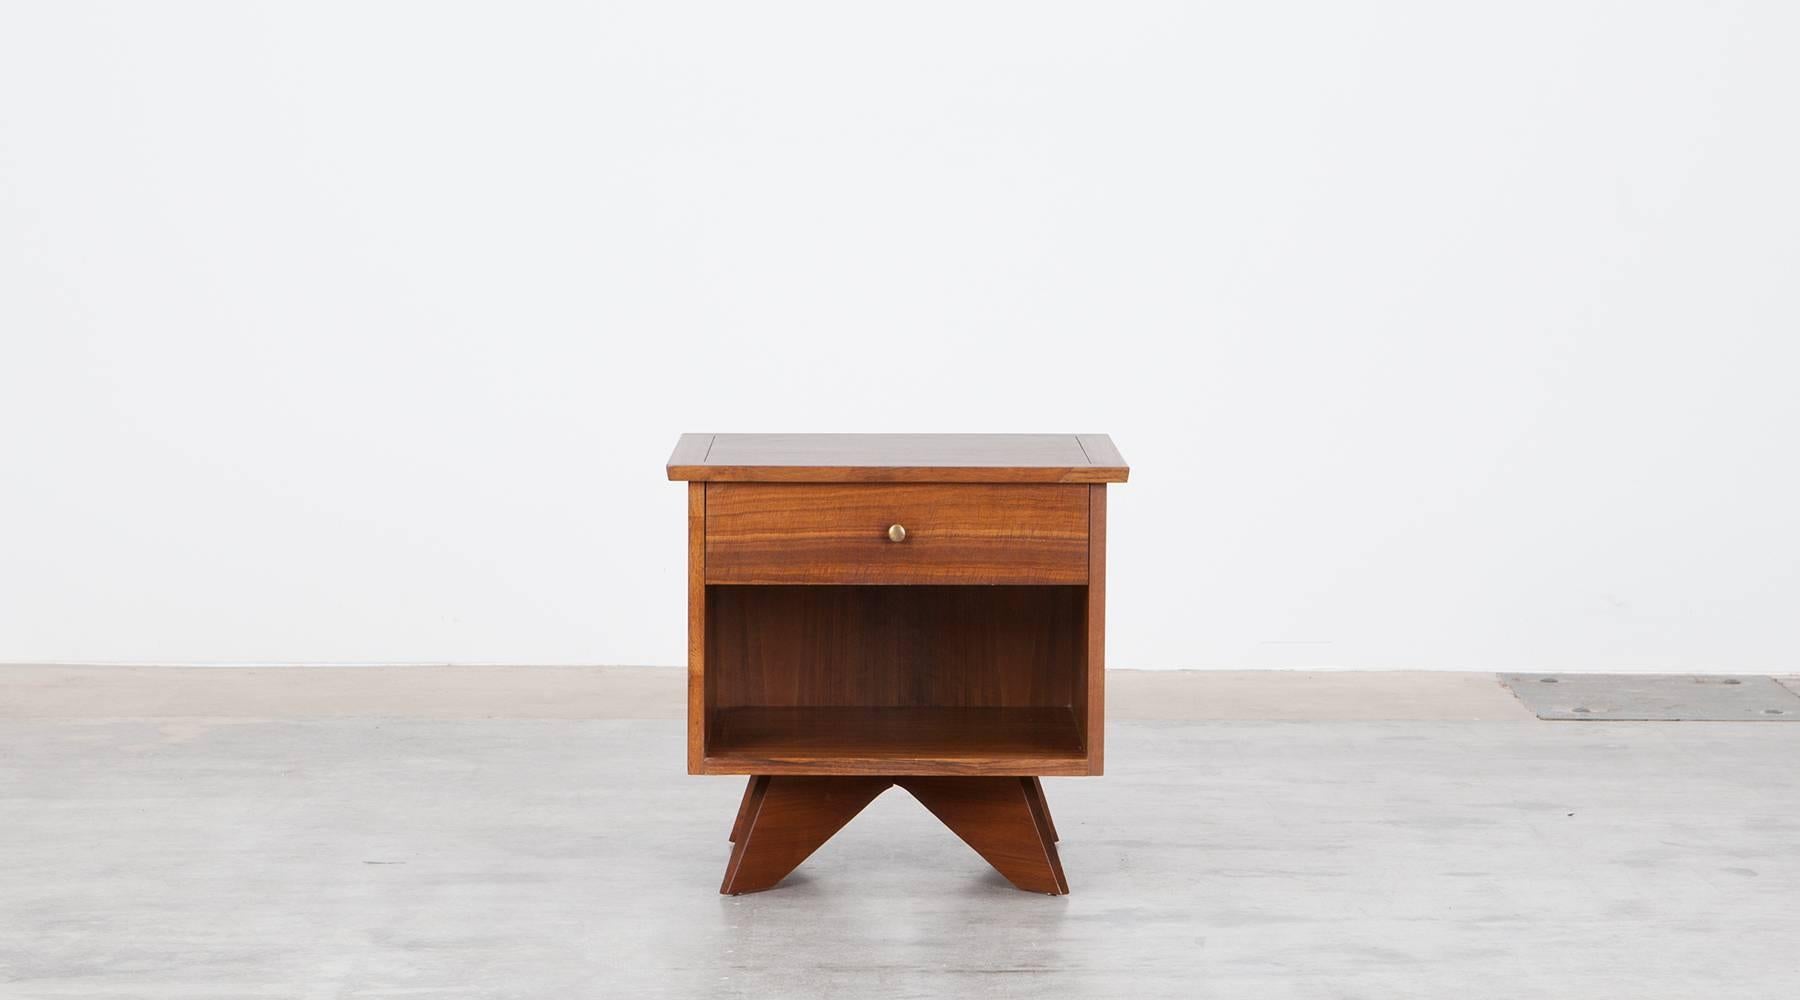 A fabulous pair of Nightstands in walnut from a rare series designed by George Nakashima. His aim was always to combine modern design with Japanese stylistic influence. George Nakashima placed emphasis on the grain and texture of the woods. 